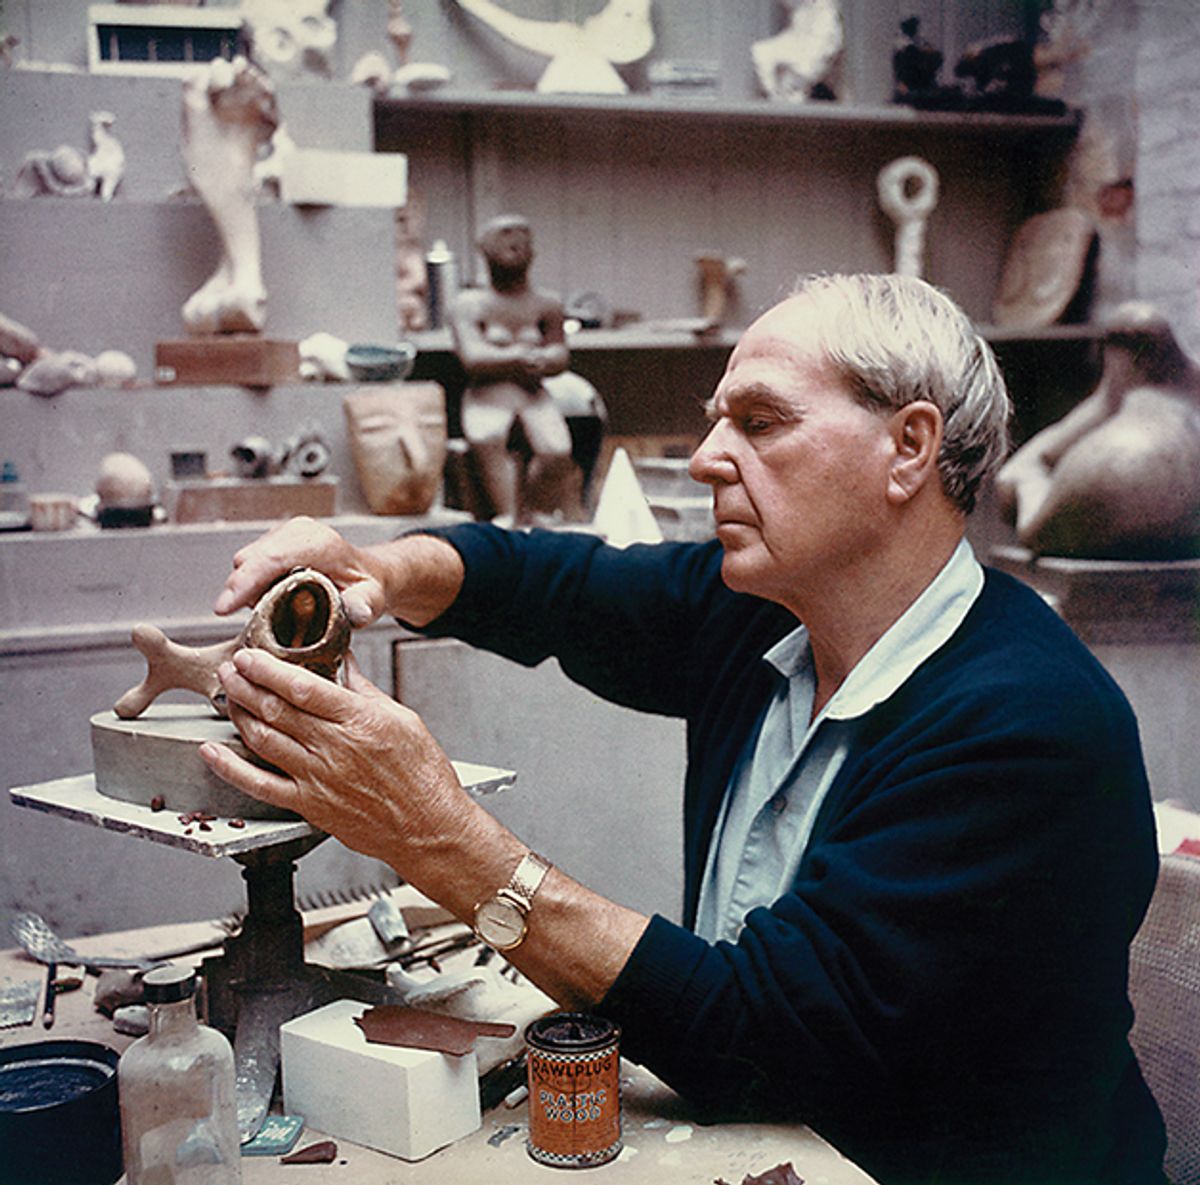 “Tinkering in his shed“: Henry Moore working in his maquette studio in Perry Green around 1968 Henry Moore Foundation Archive

